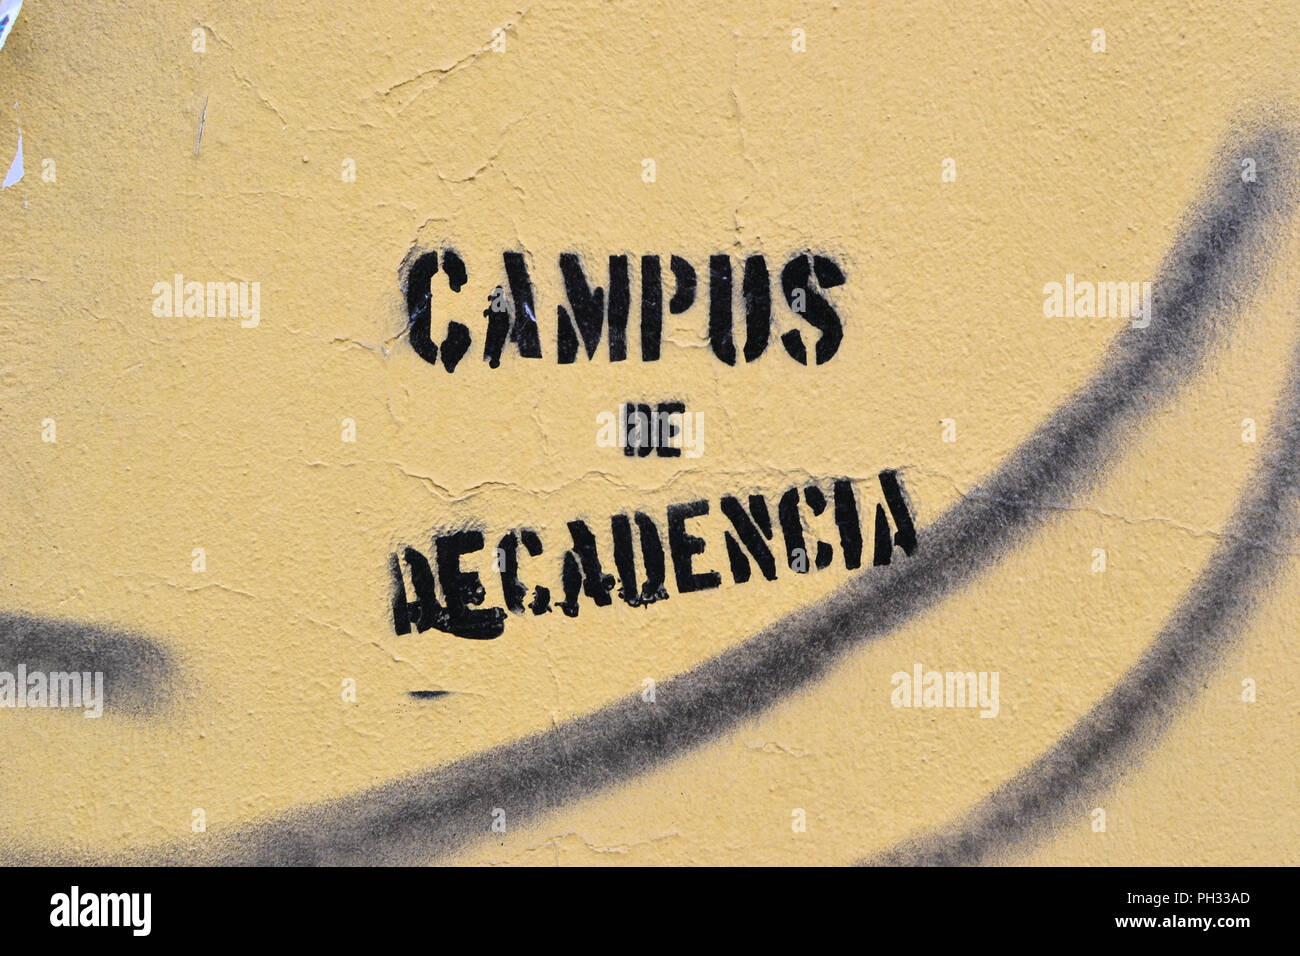 Stenciled political graffiti on a wall at the campus of the University of Oviedo, in Oviedo, Asturias, Spain, claiming it to be a 'campus of decline.' Stock Photo